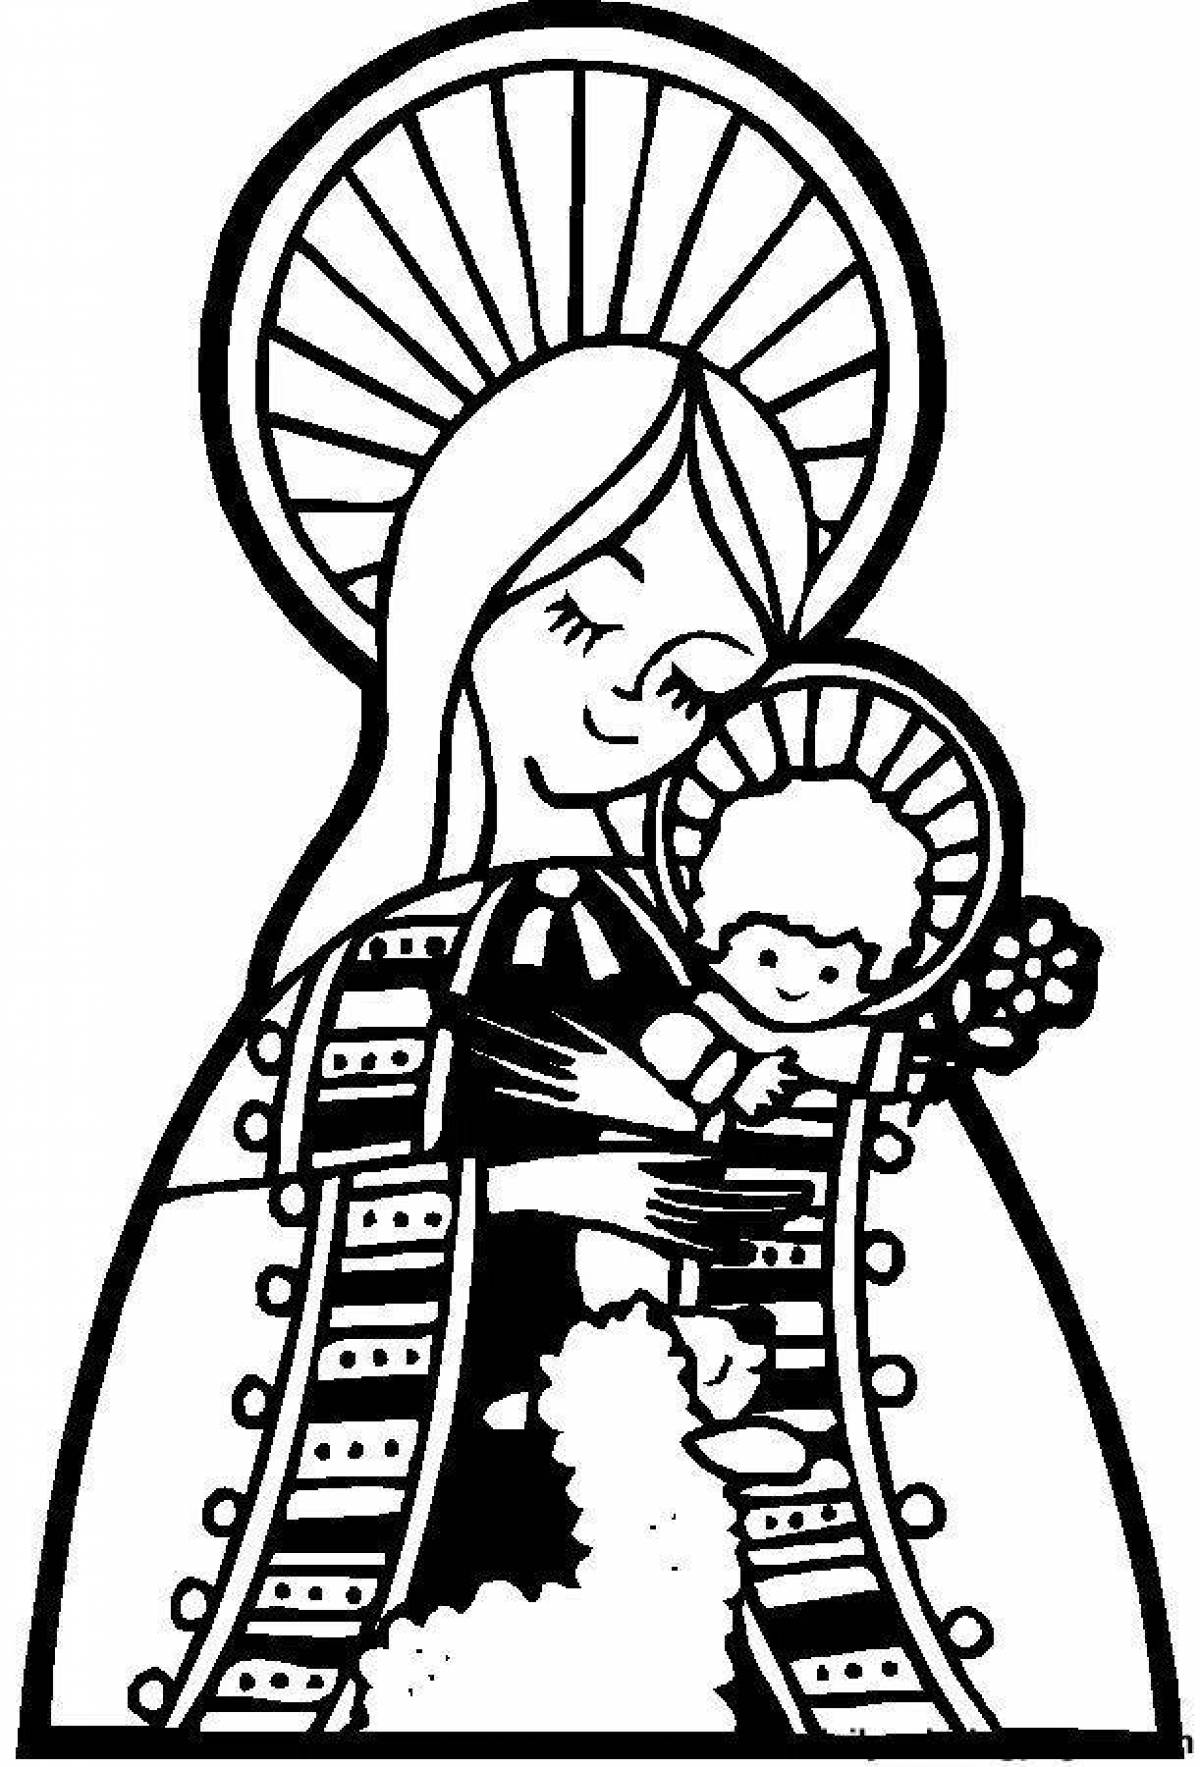 Coloring page of the divine virgin mary